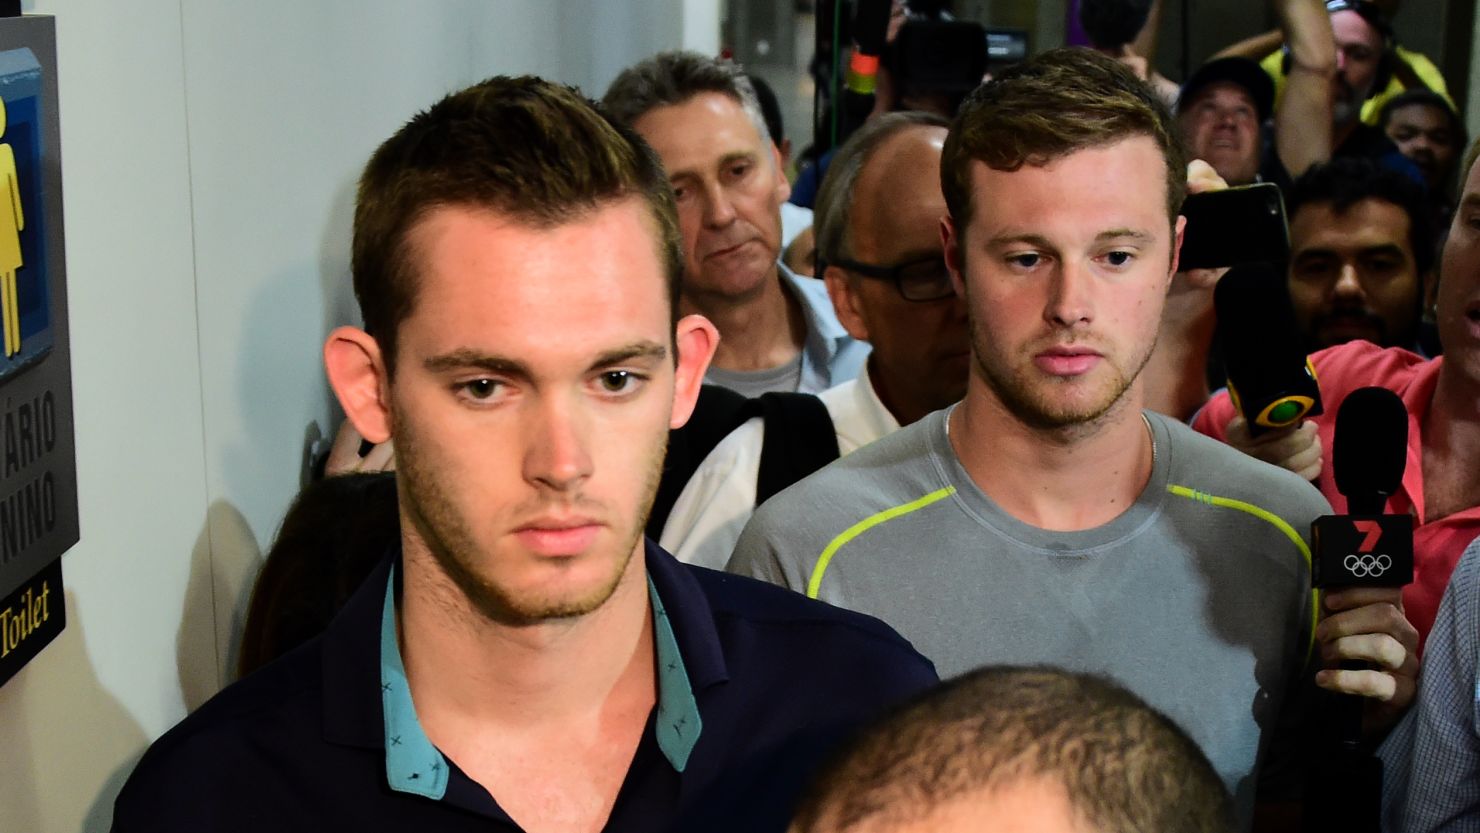 American swimmers Gunnar Bentz (left) and Jack Conger leave the police station at the Rio airport.